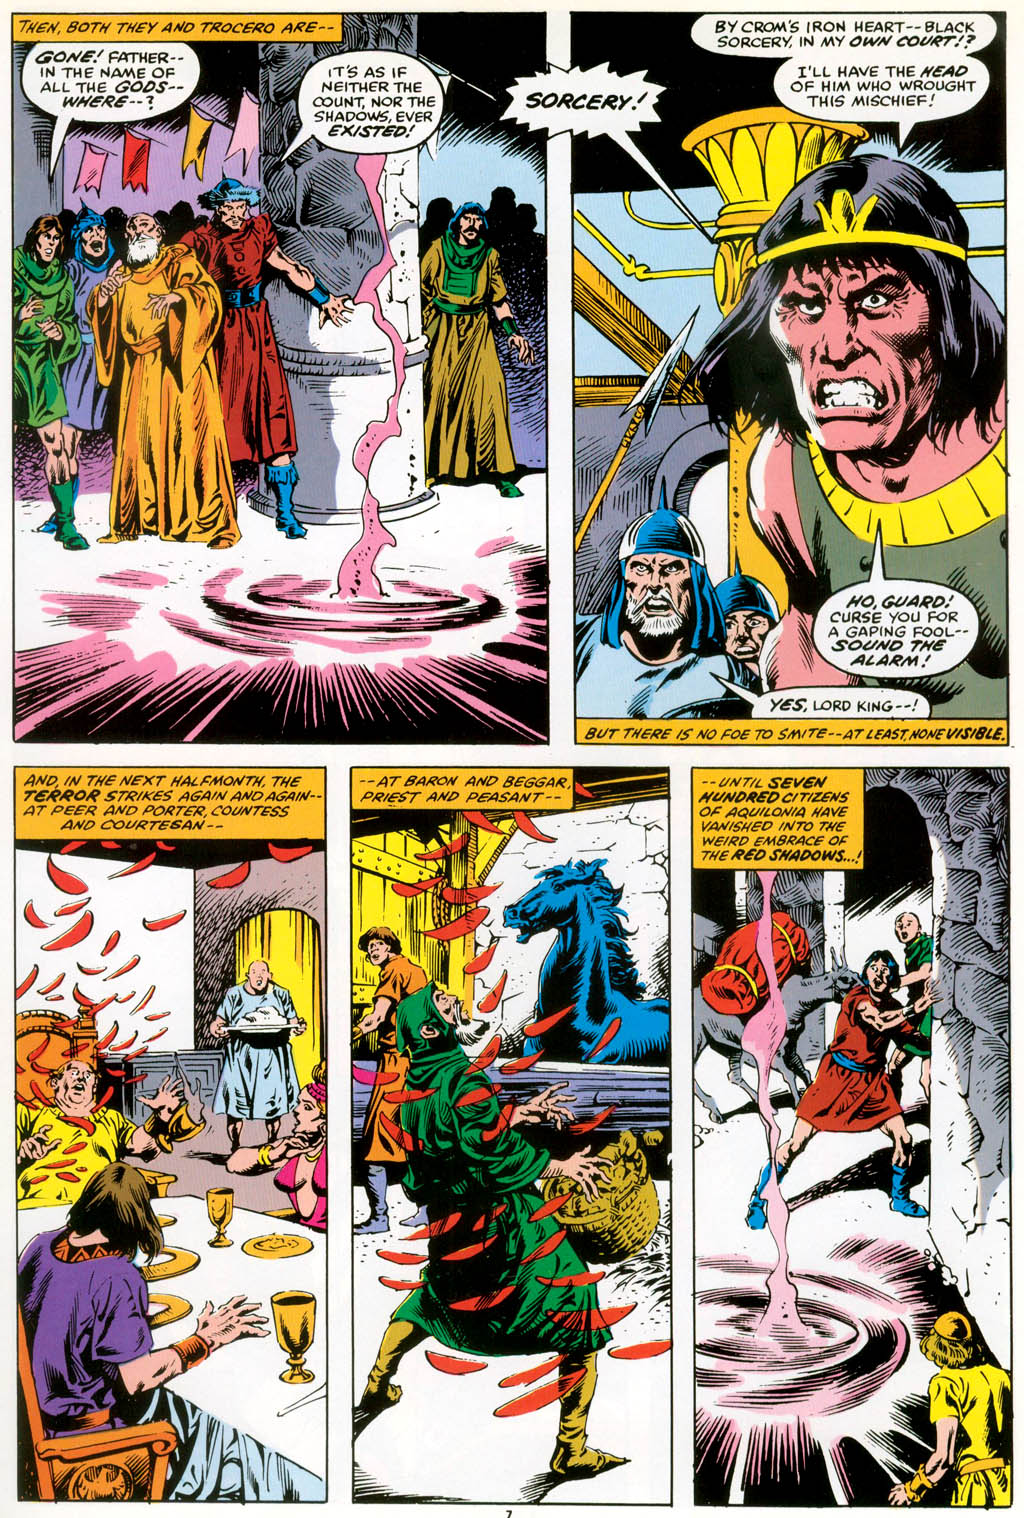 Read online Marvel Graphic Novel comic -  Issue #42 - Conan of the Isles - 8